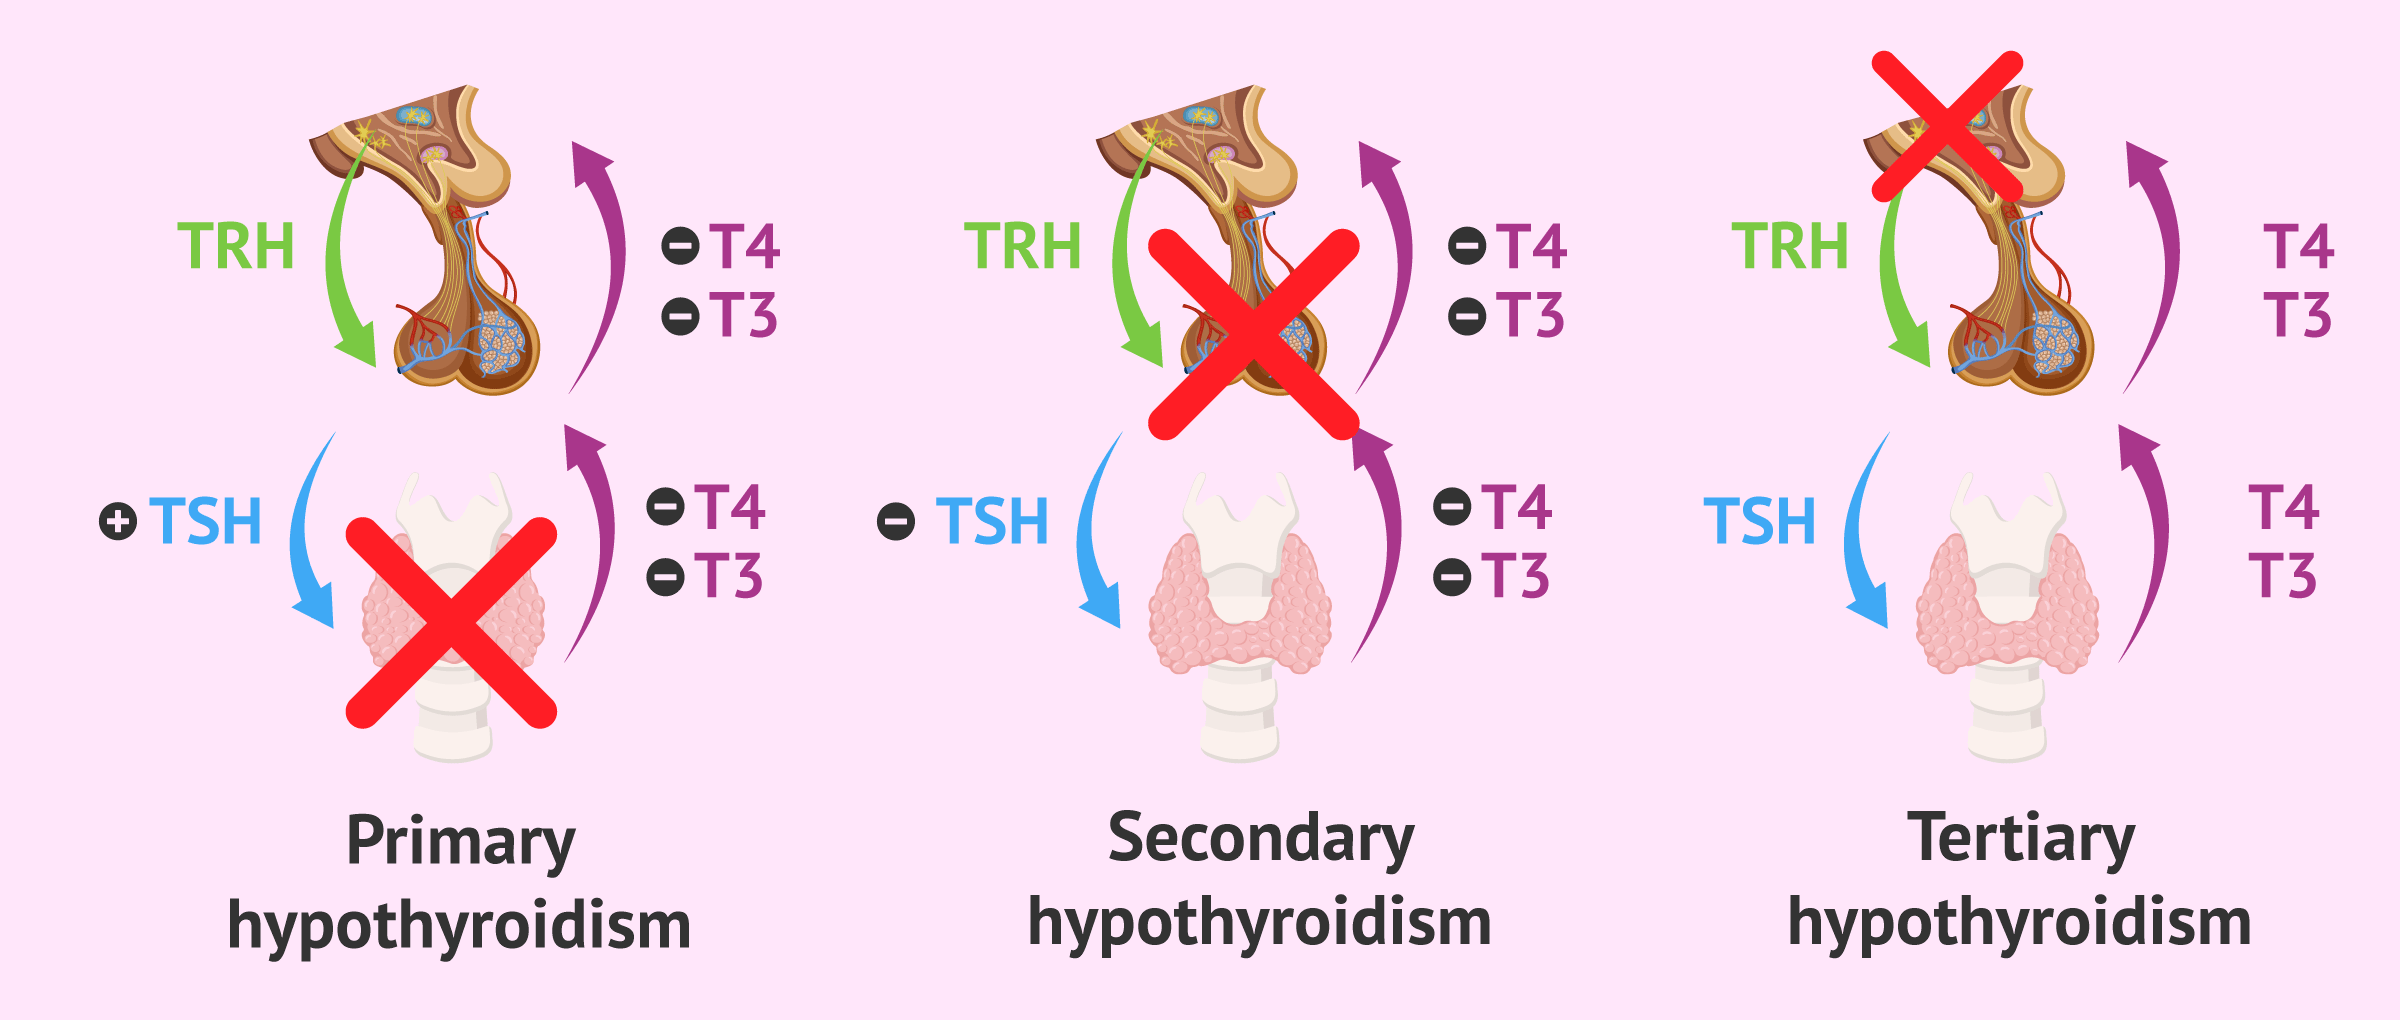 Differences between types of hypothyroidism